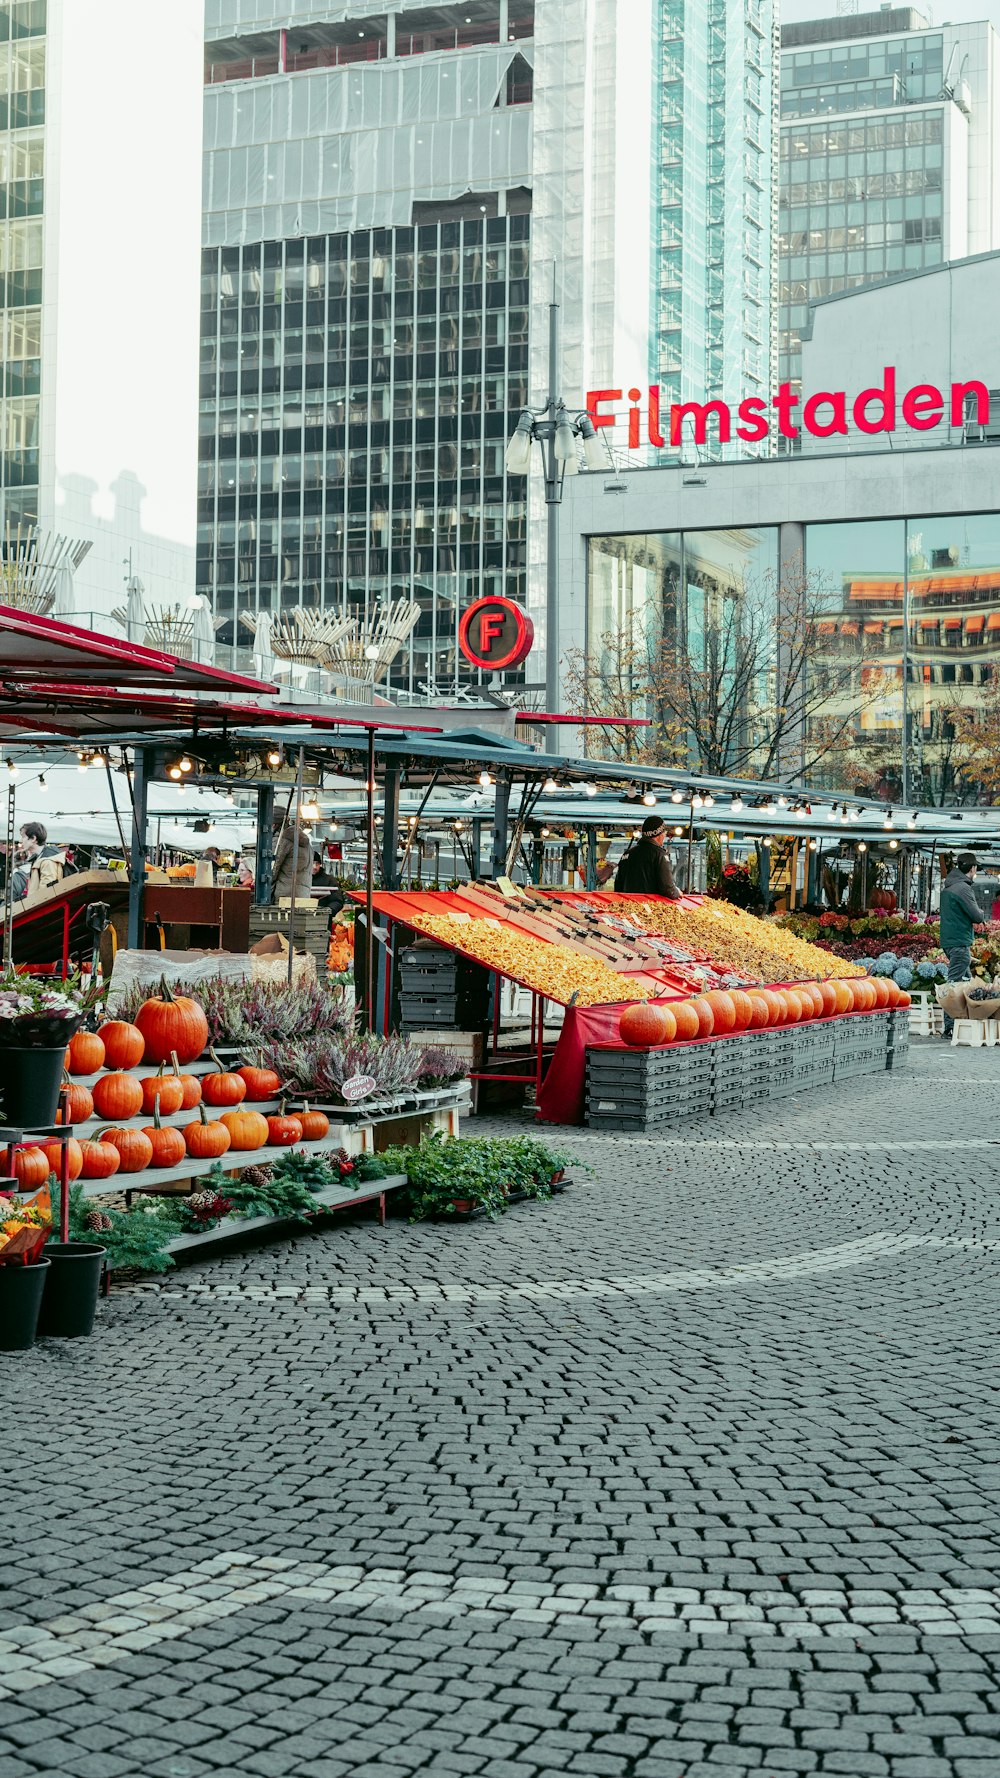 an outdoor market with lots of fruits and vegetables